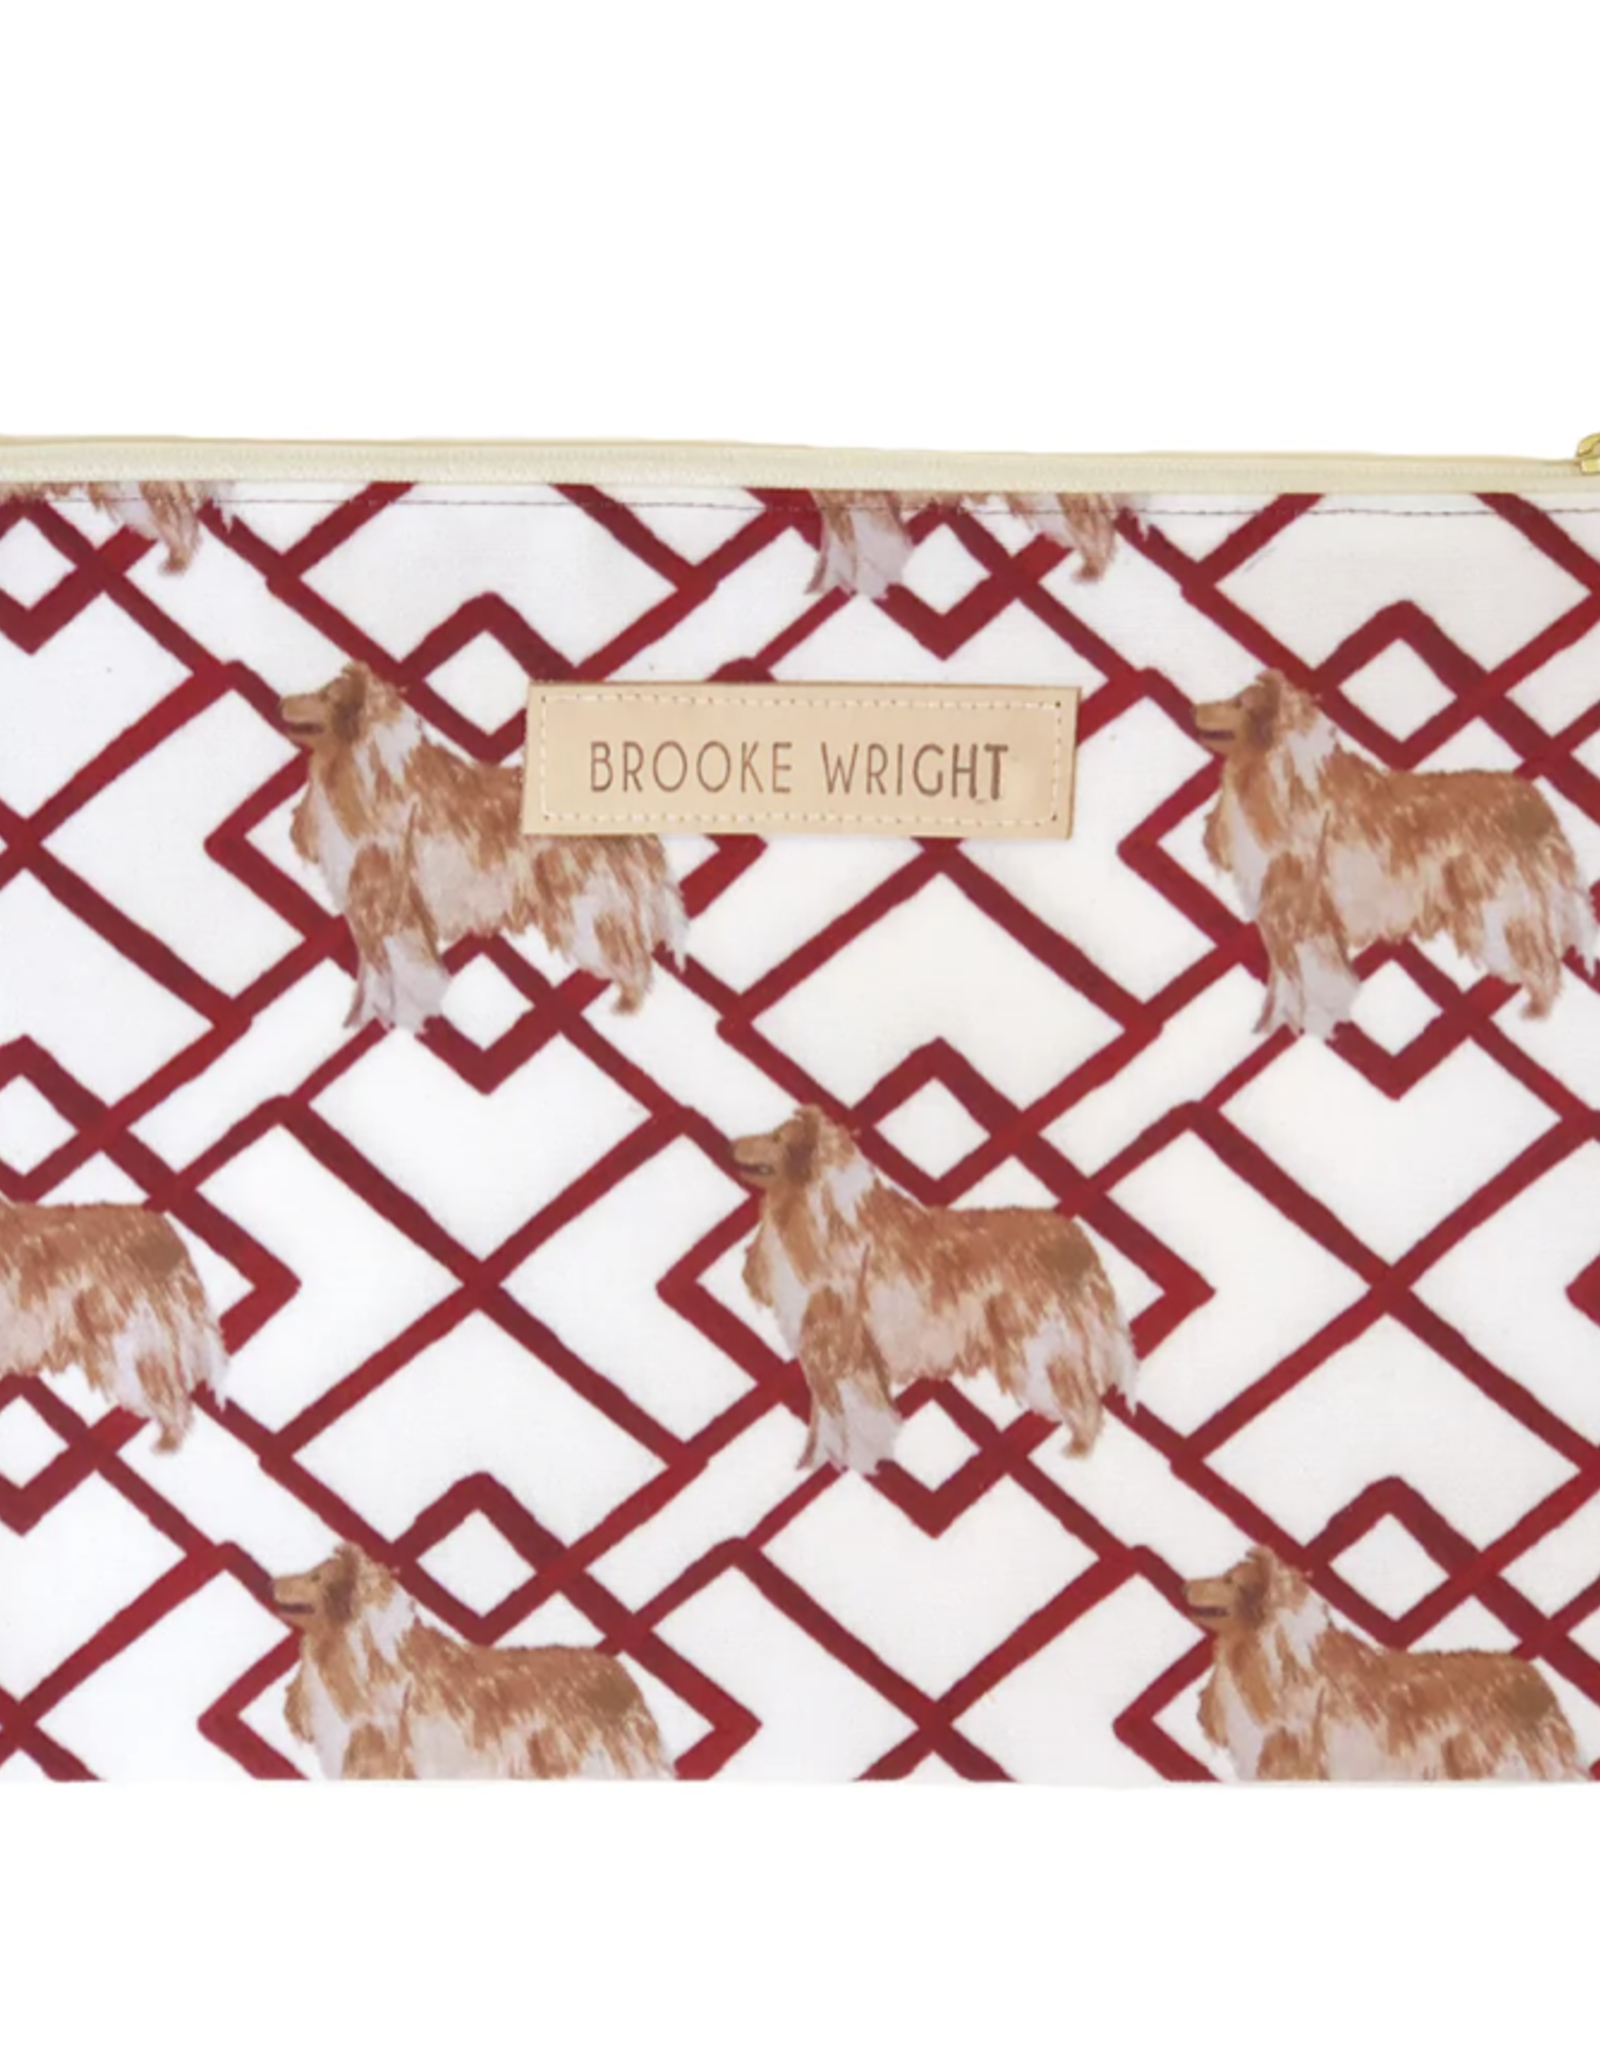 Brooke Wright Brooke Wright Large Collegiate Pouch